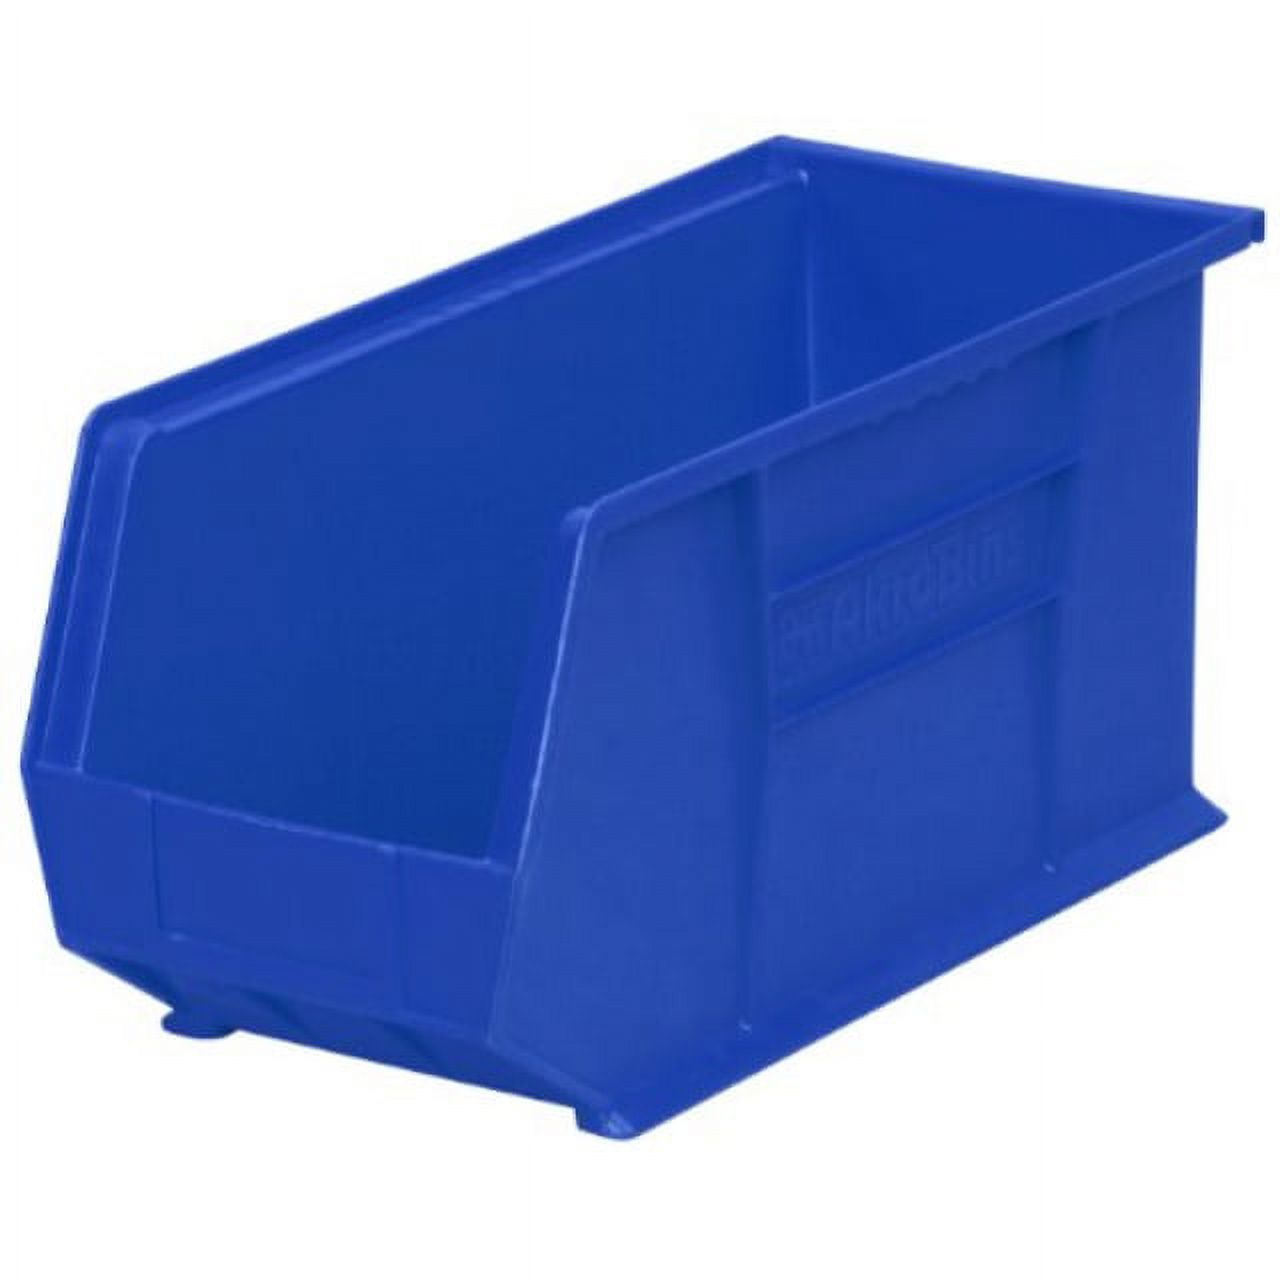 akro-mils 30265 plastic storage stacking hanging akro bin, 18-inch by 8-inch by 9-inch, blue, case of 6 - image 1 of 6